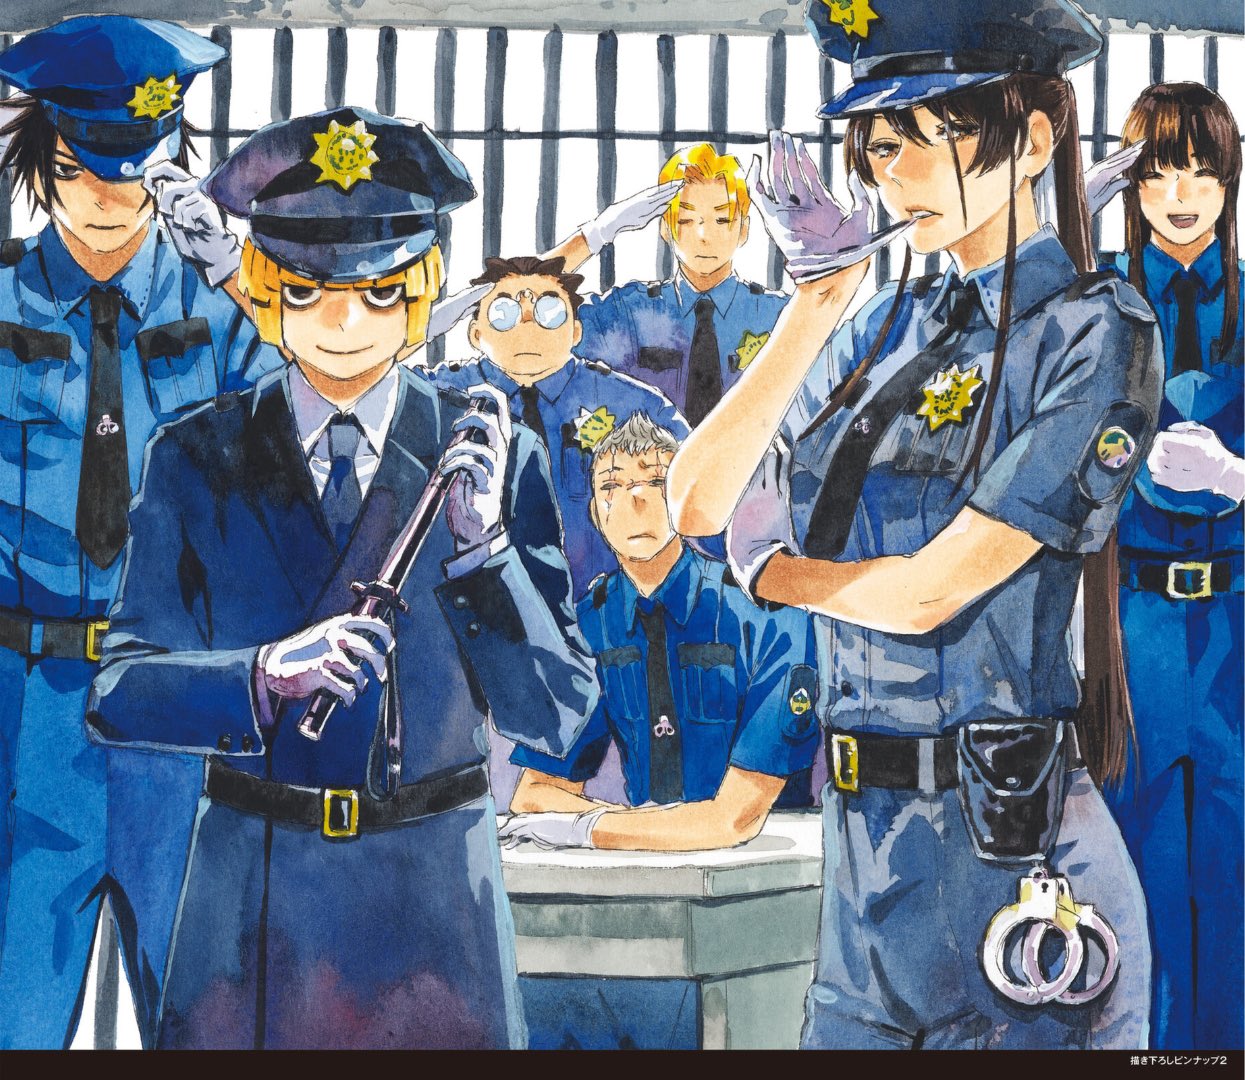 1girl 6+boys aza_touma badge belt biting black_hair blonde_hair closed_eyes cuffs everyone glasses glove_biting gloves hair_between_eyes handcuffs hat holding holding_clothes holding_hat jigokuraku long_hair looking_at_viewer multiple_boys necktie officer official_art open_mouth police police_badge police_hat police_uniform policeman policewoman ponytail scarf serious short_hair short_sleeves sidelocks smile standing uniform white_gloves yamada_asaemon_fuchi yamada_asaemon_sagiri yamada_asaemon_senta yamada_asaemon_shion yamada_asaemon_shugen yamada_asaemon_tensa yuji_kaku